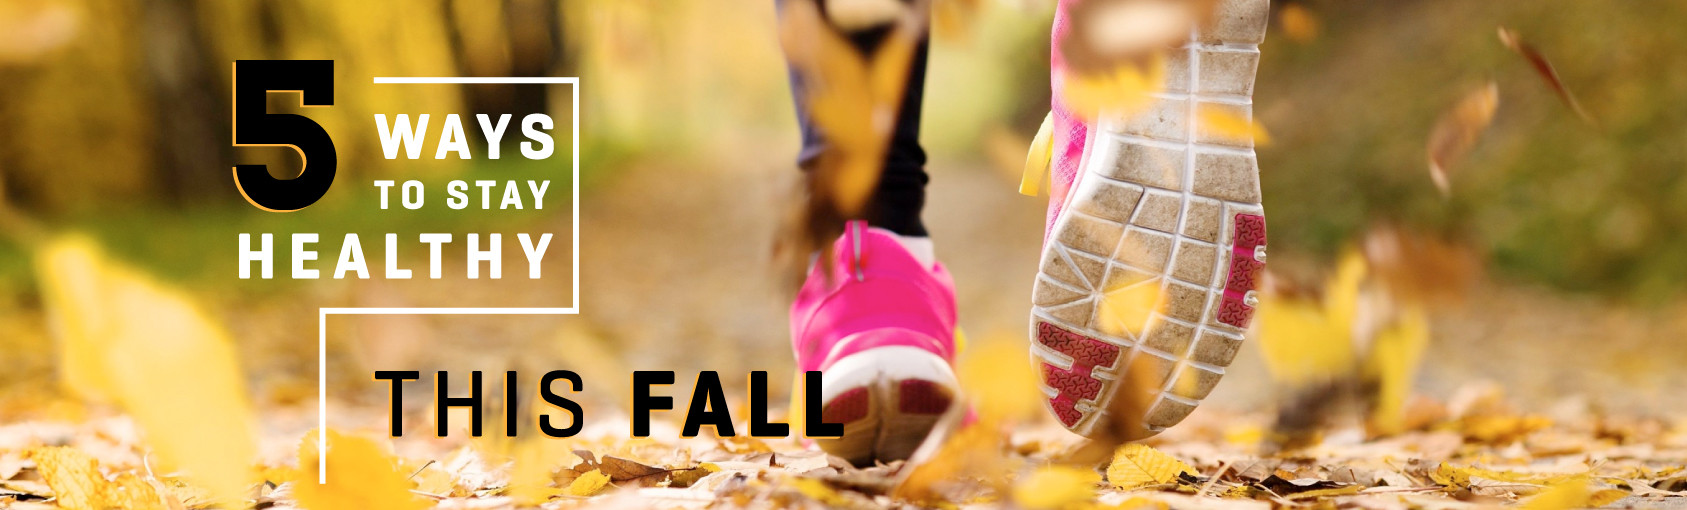 5 Ways to Stay Healthy This Fall banner